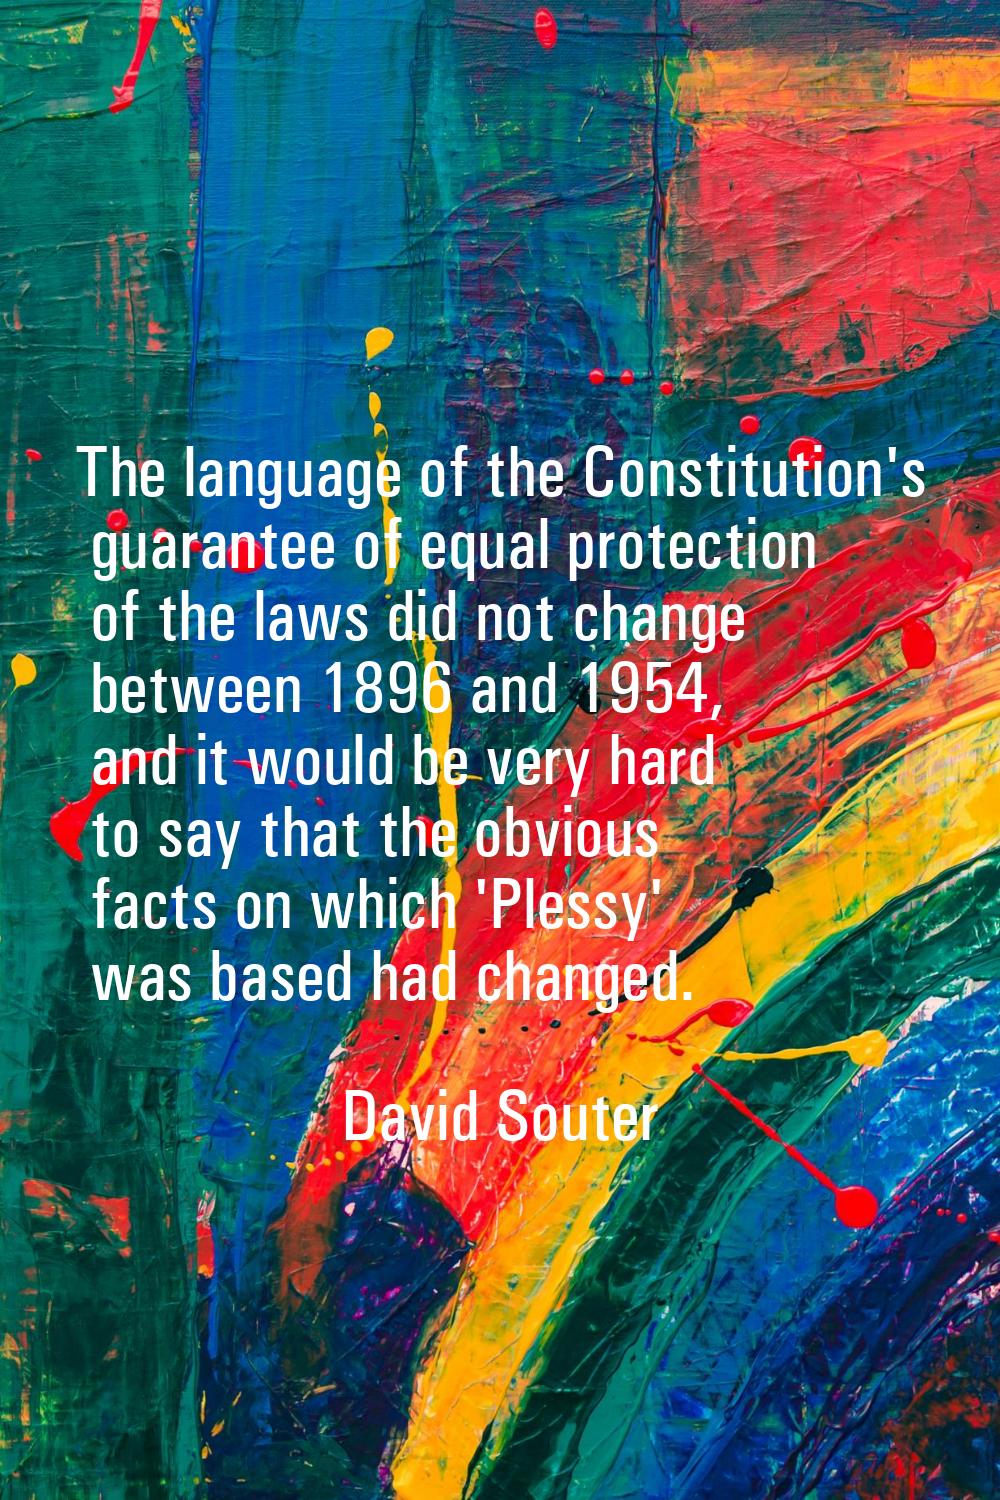 The language of the Constitution's guarantee of equal protection of the laws did not change between